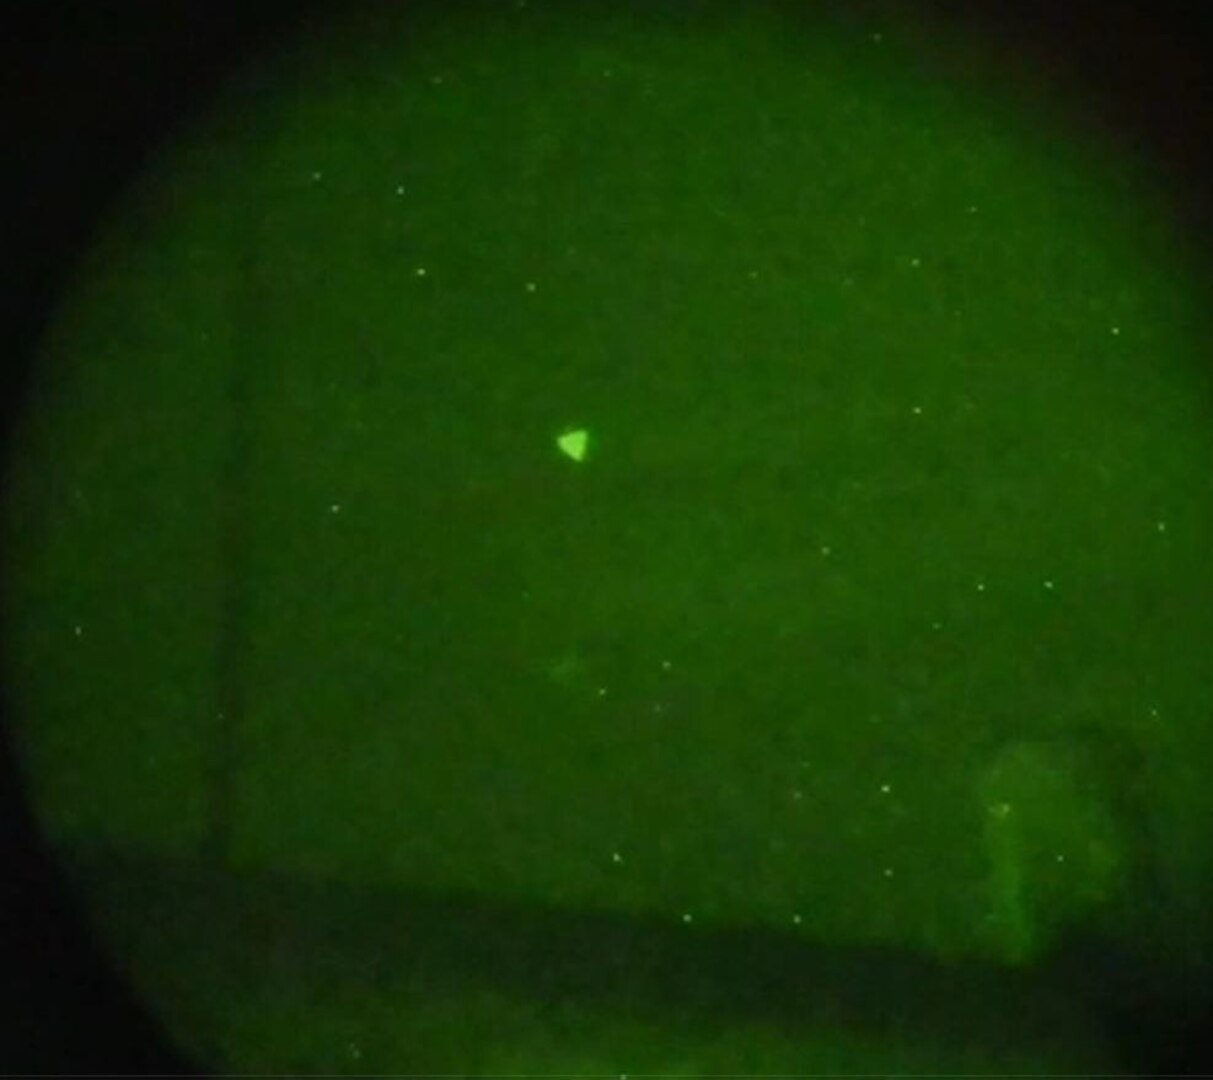 A triangular flying craft is photographed in the sky using night vision.